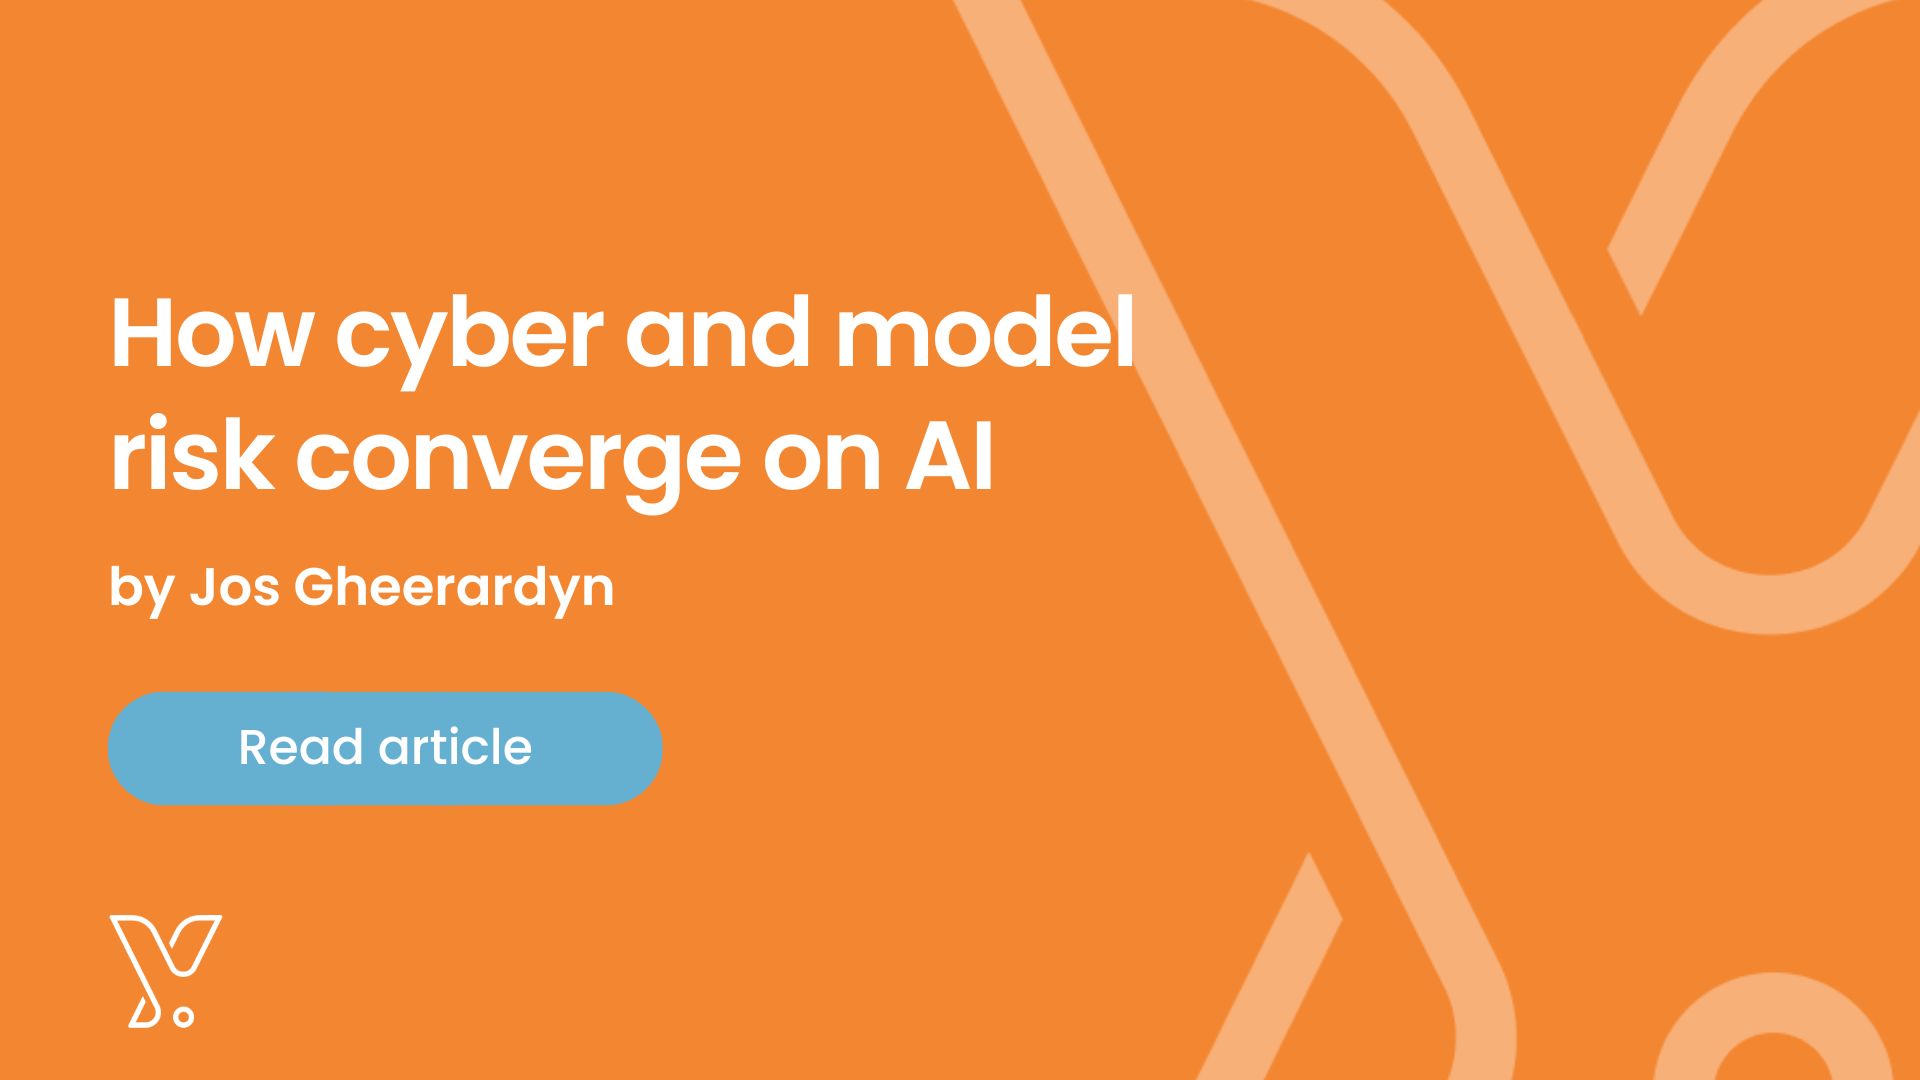 How cyber and model risk converge on AI